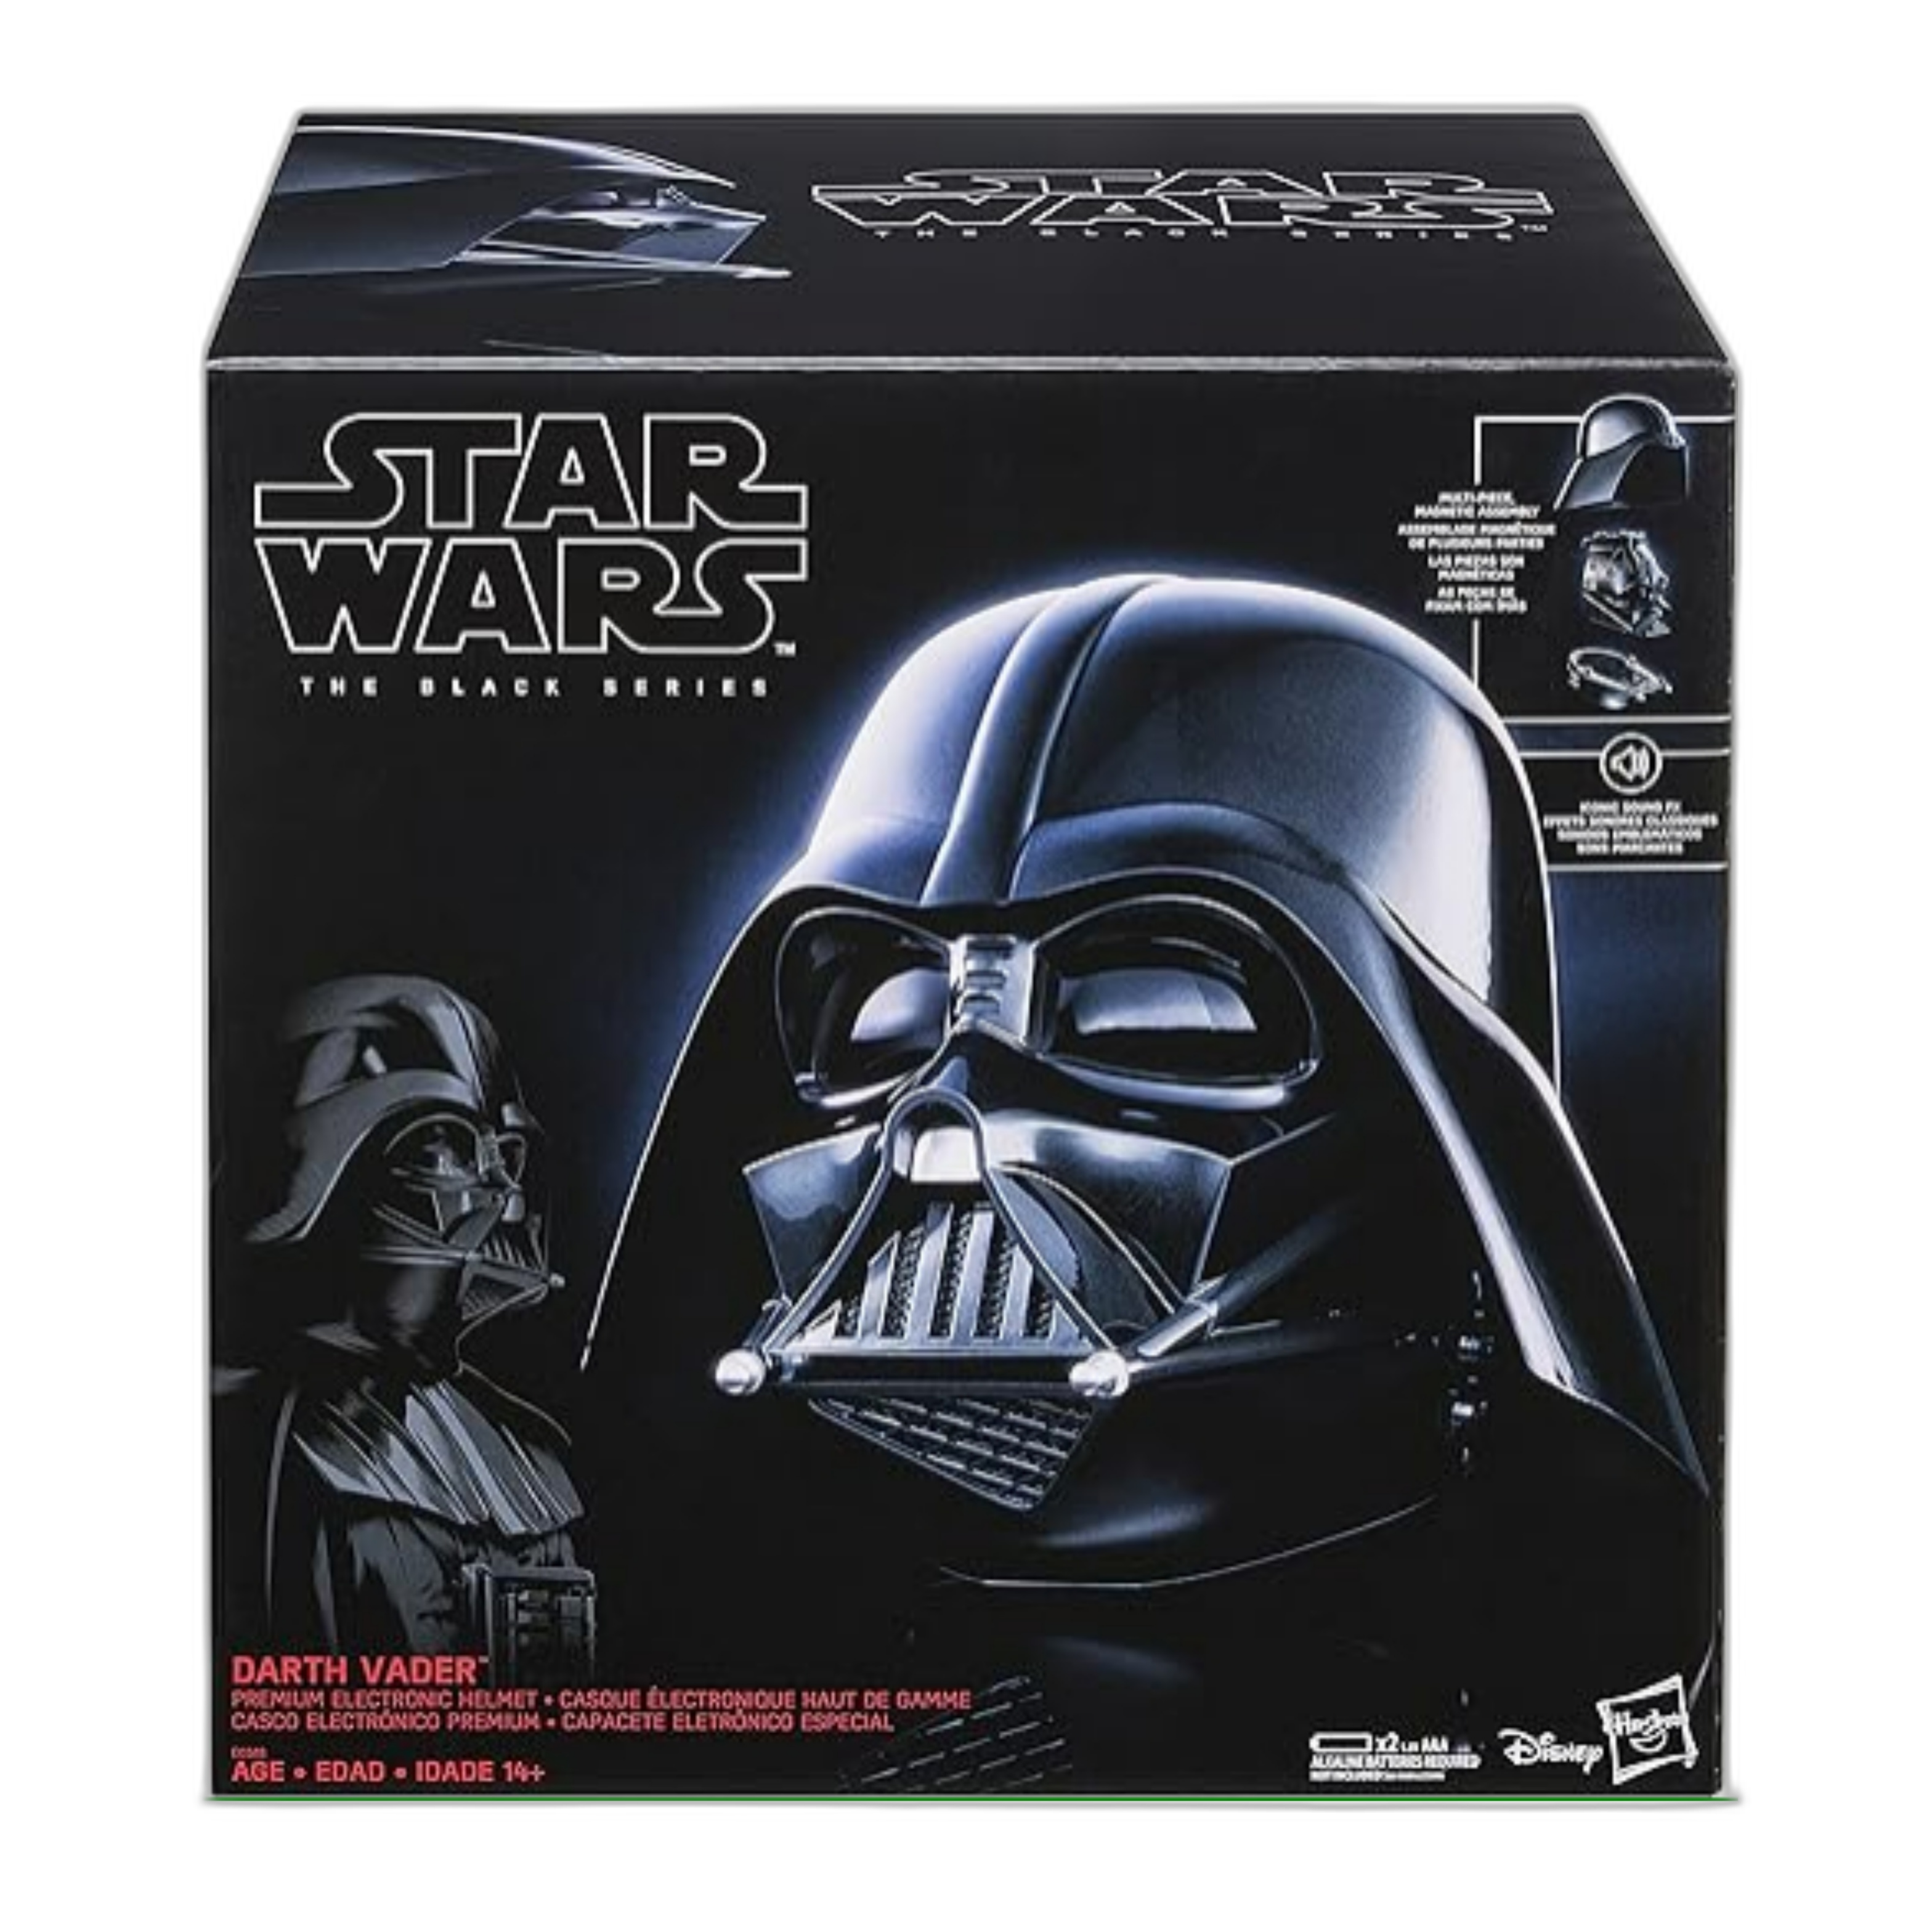 Star Wars Blacks Series Helmet, a collectible, in its box. 